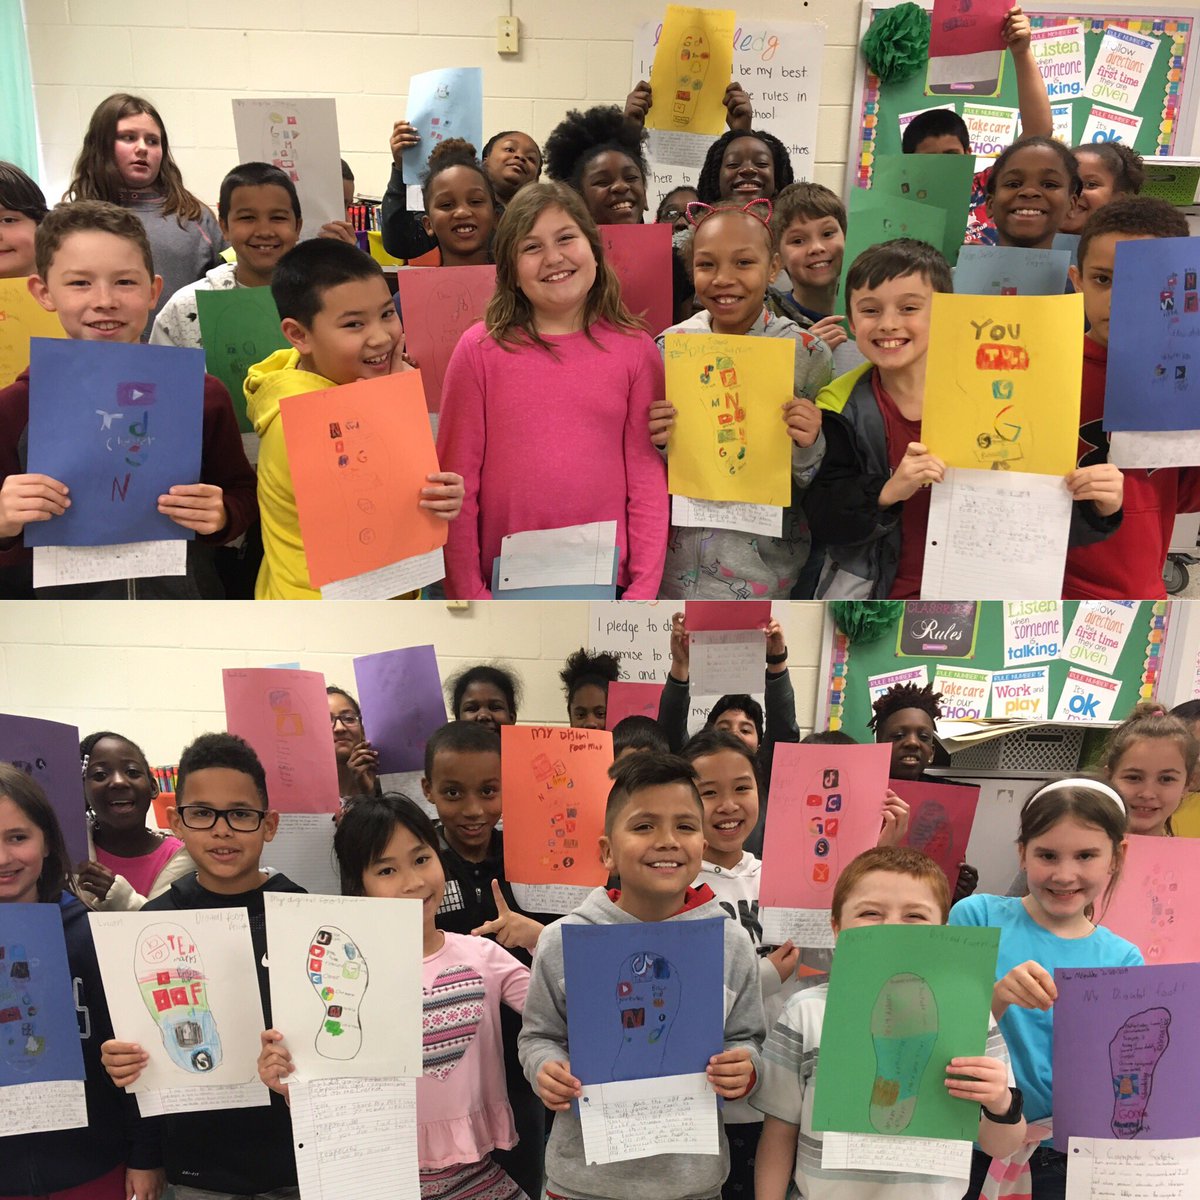 Do you know your digital foot print? These fourth graders do! They tracked their digital footprint and wrote about how to be safe, respectful, and responsible online. #DigitalLearningDay2019 @PointOViewES @drherber